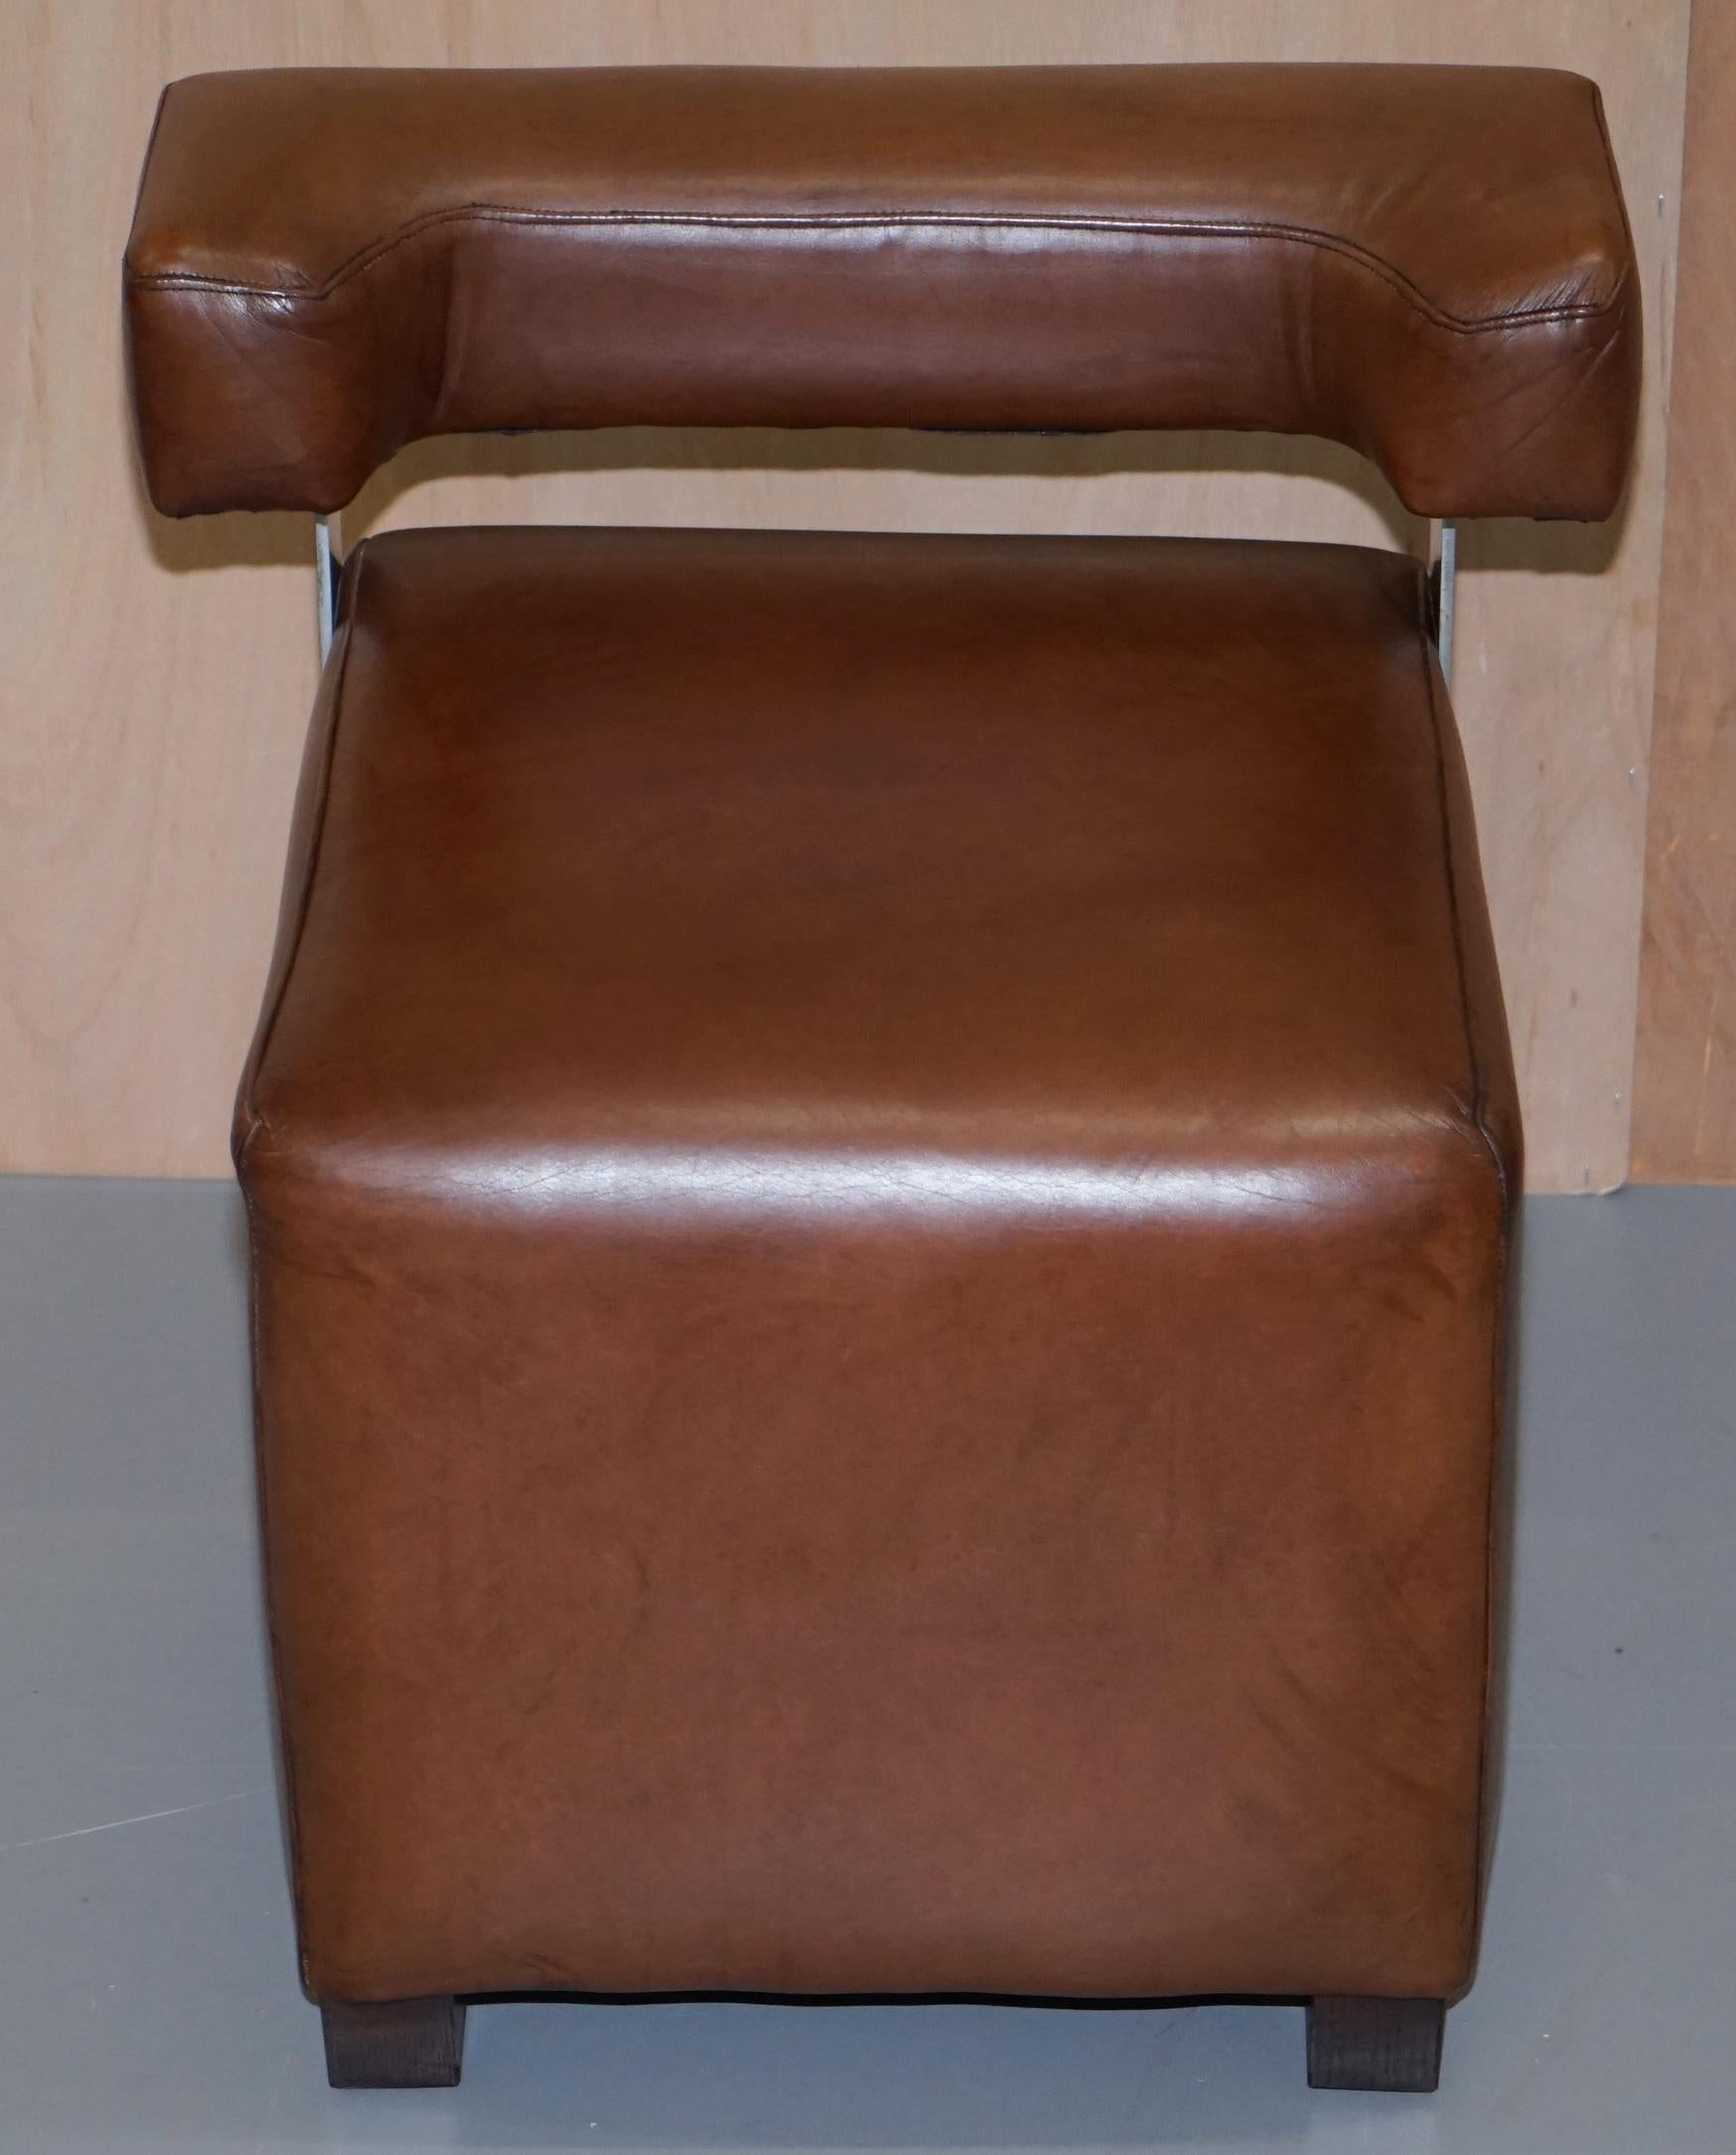 English Pair of Heritage Brown Leather with Chrome Back Supports Small Chair Stools